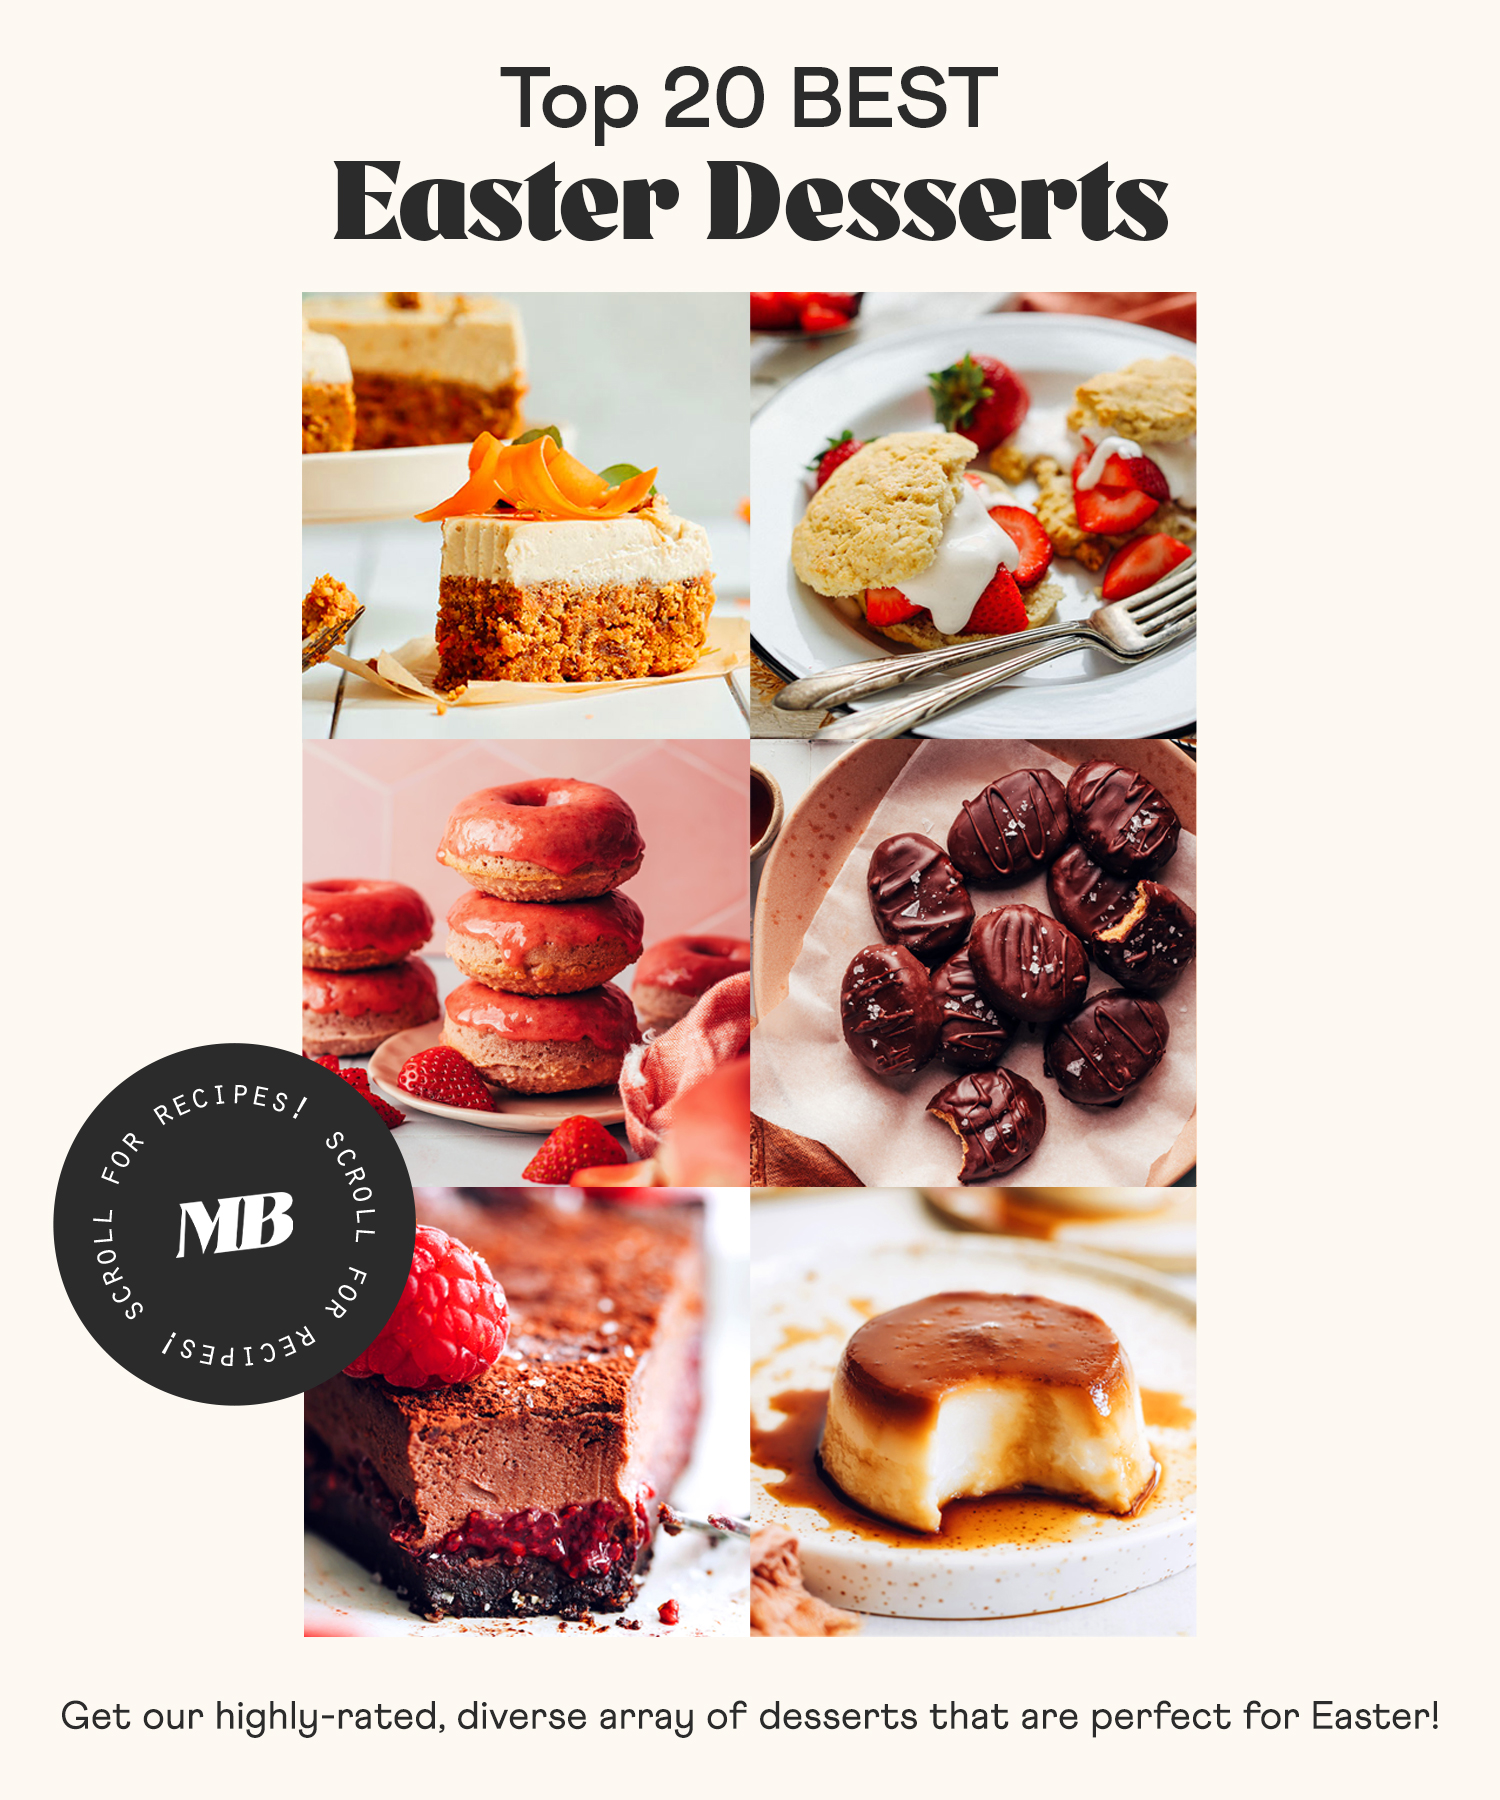 Carrot cake, shortcake, donuts, peanut butter eggs, and other vegan desserts perfect for Easter